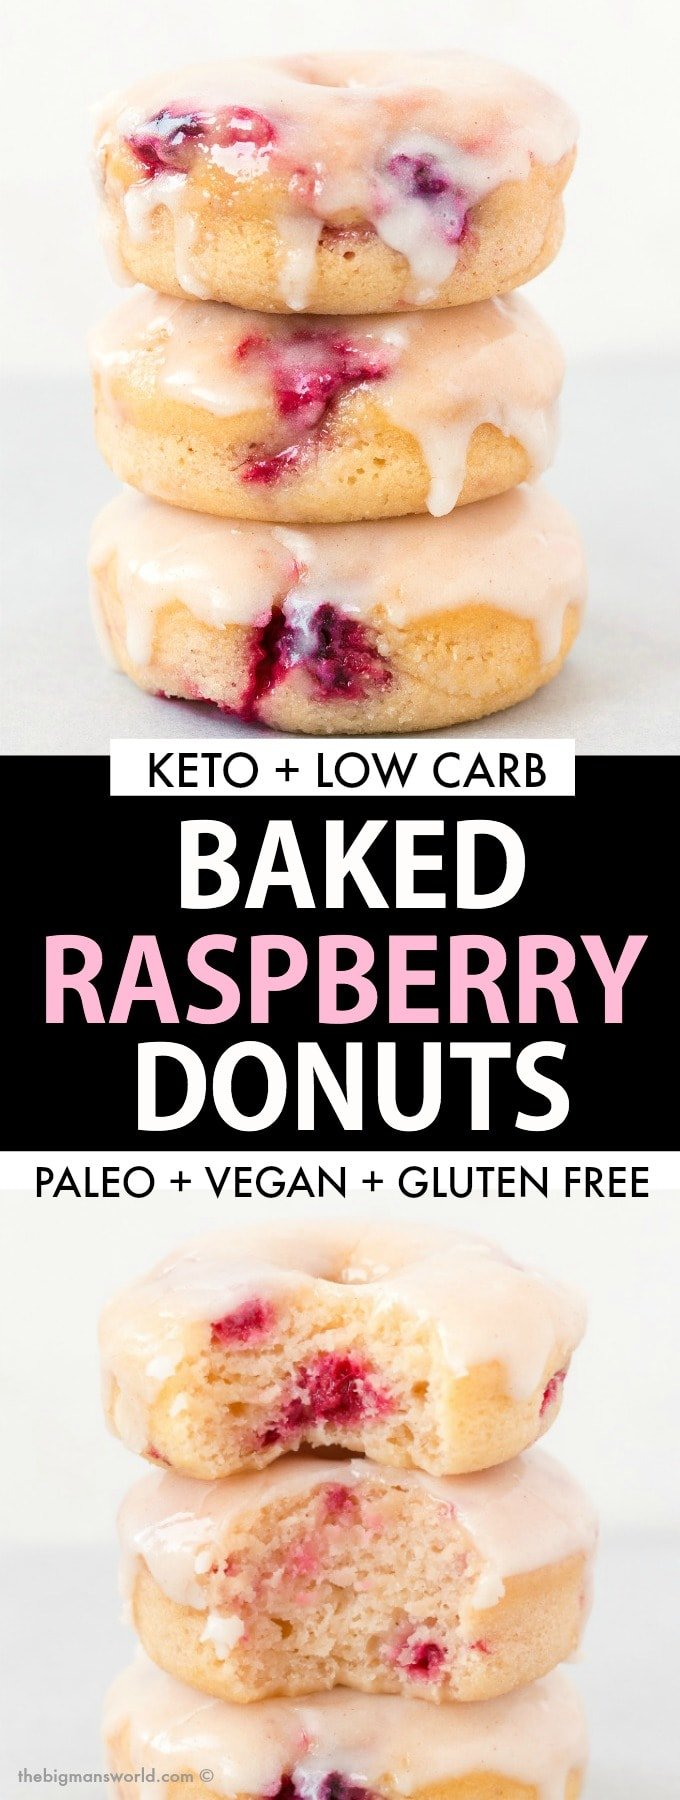 Easy baked donut recipe loaded with raspberries and topped with a sugar free glaze.